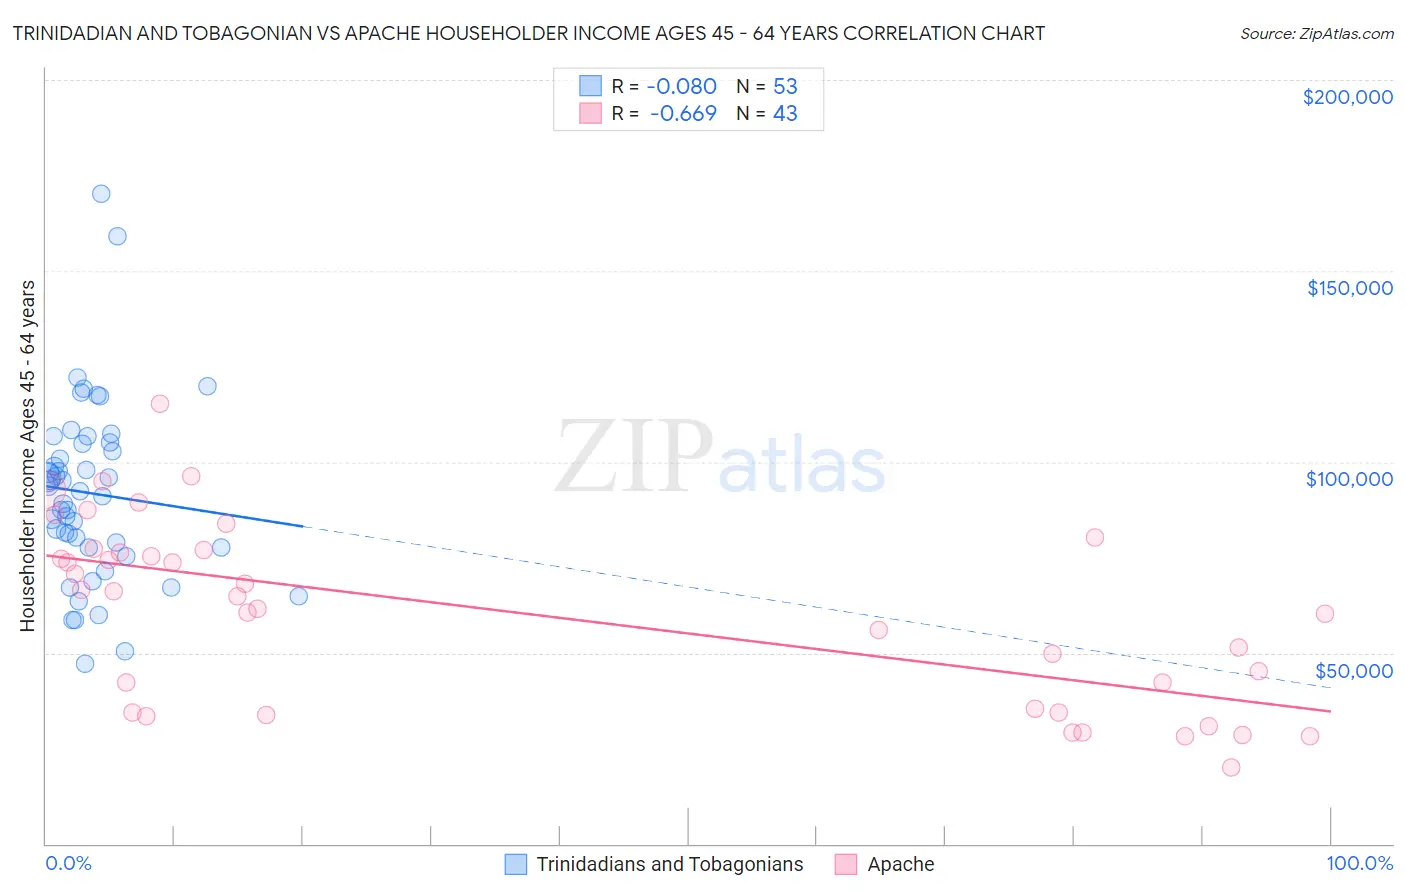 Trinidadian and Tobagonian vs Apache Householder Income Ages 45 - 64 years